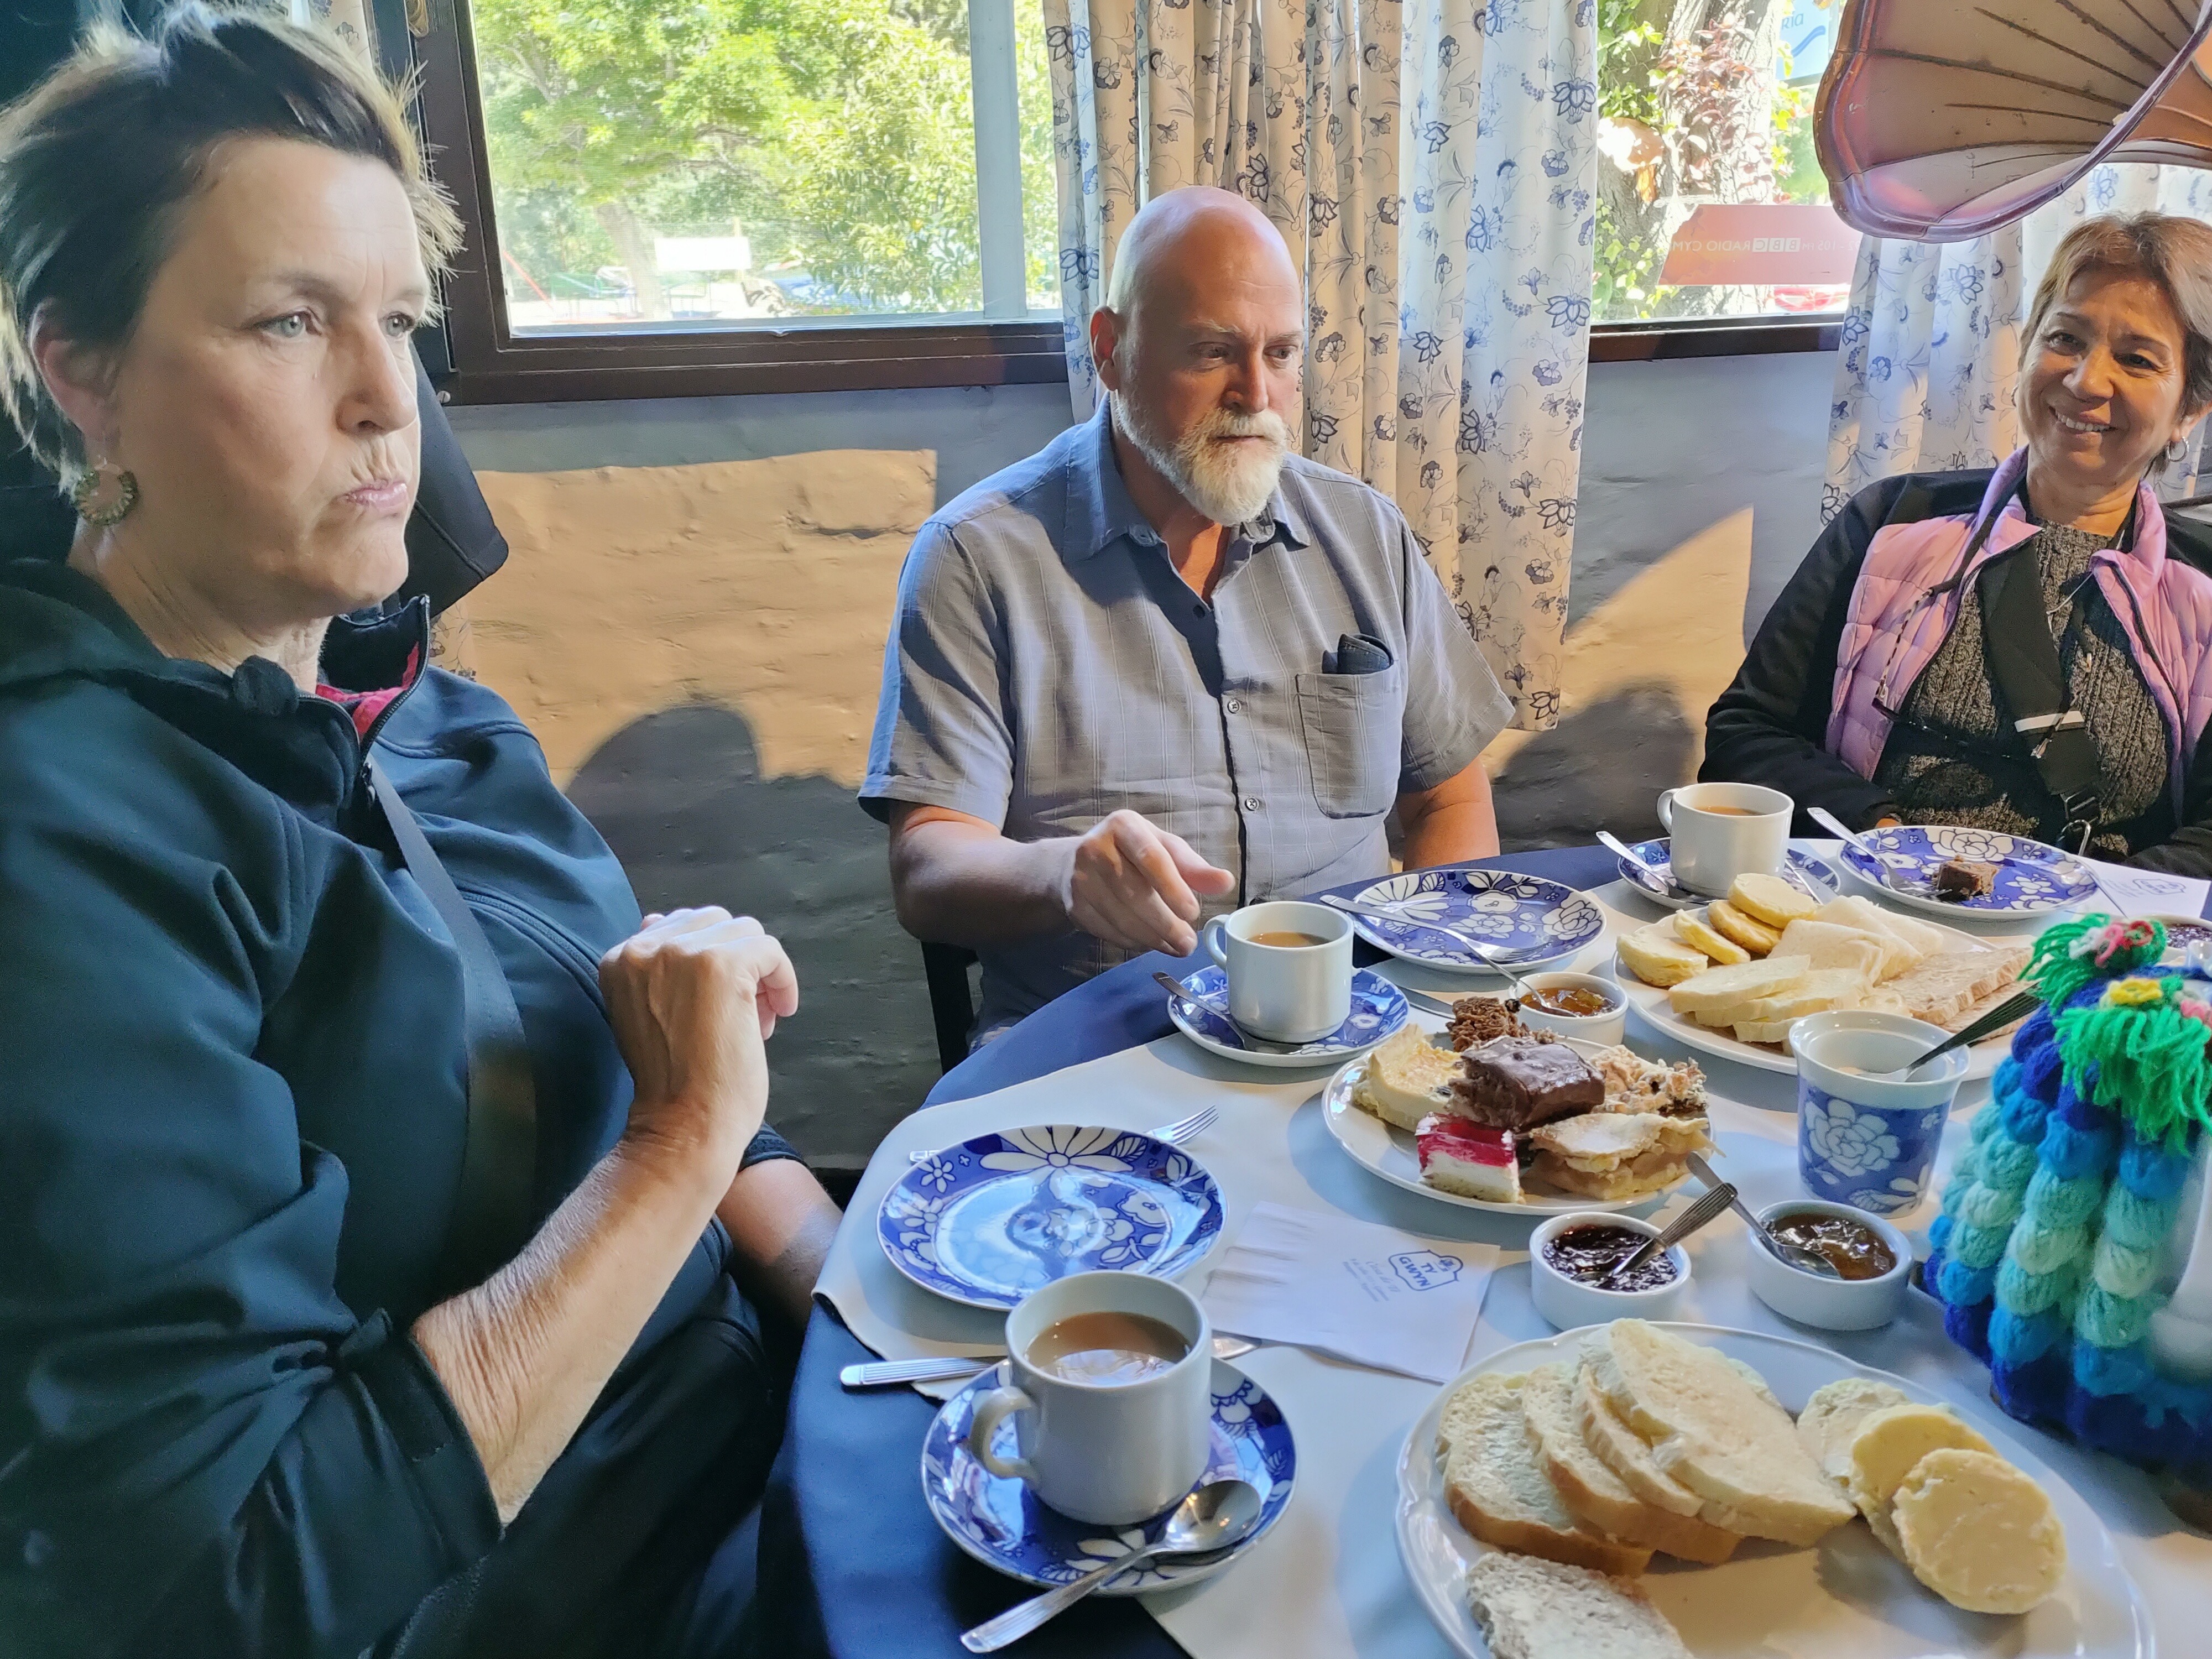 A welsh tea - basically bread and butter, scones with jams (but no cream!!!) and cakes , cakes, cakes galore. Plus a brightly coloured knitted tea cosy centre stage, and a lady who seems to be laughing at me.